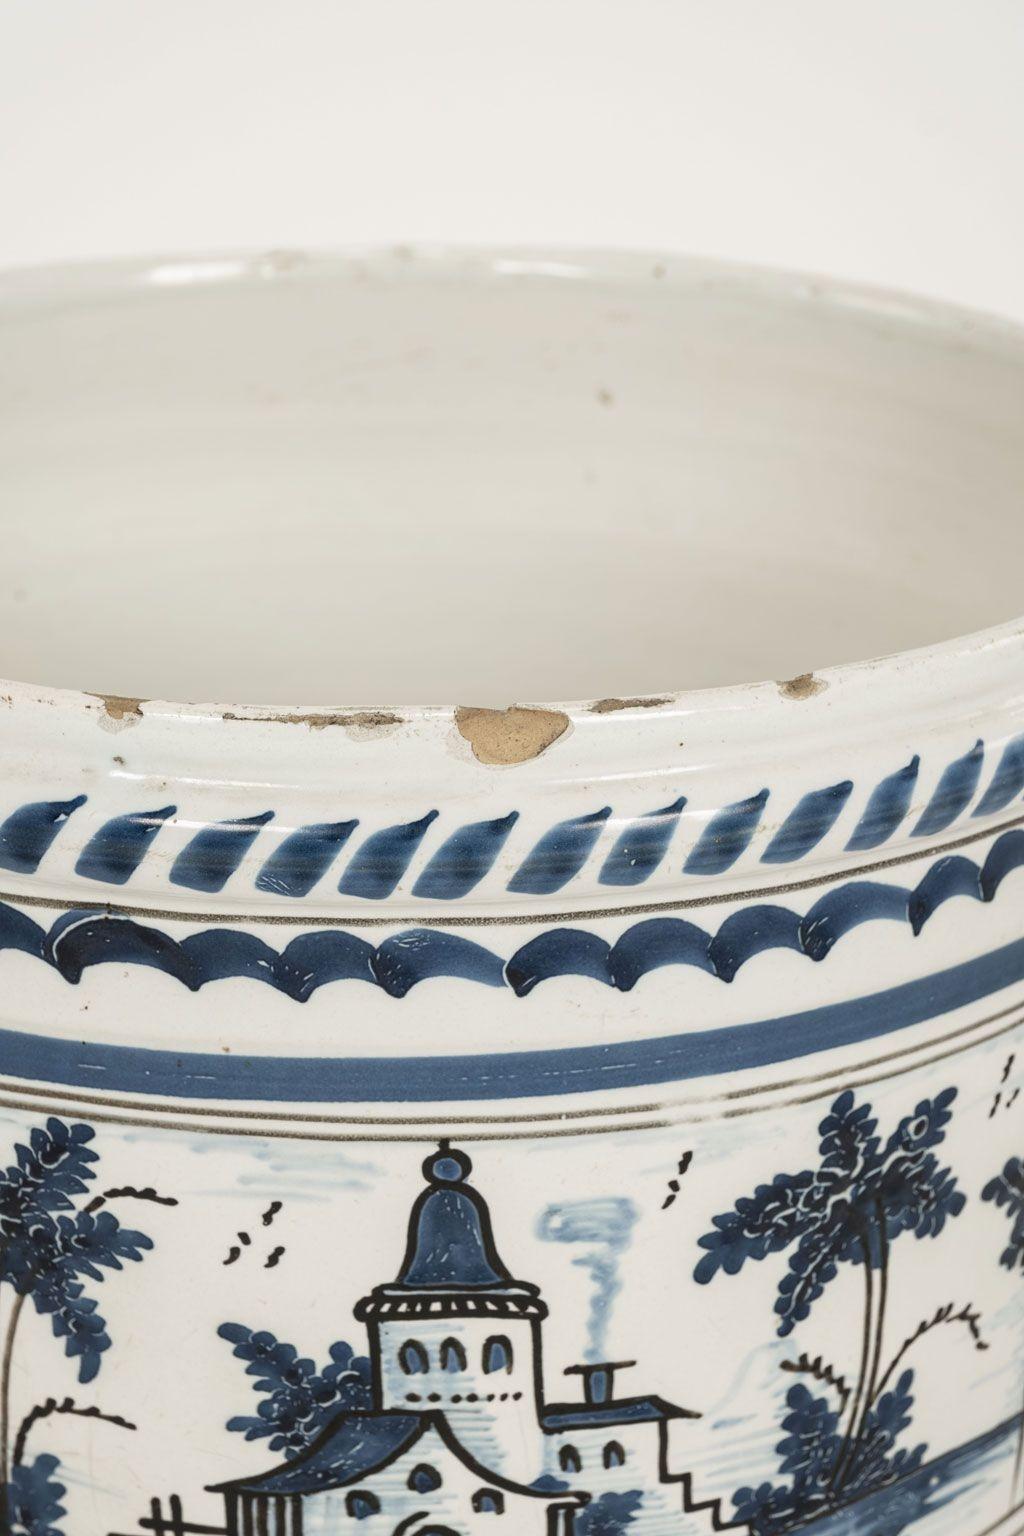 Nevers Faience 'Pot a Oranger' In Good Condition For Sale In Houston, TX